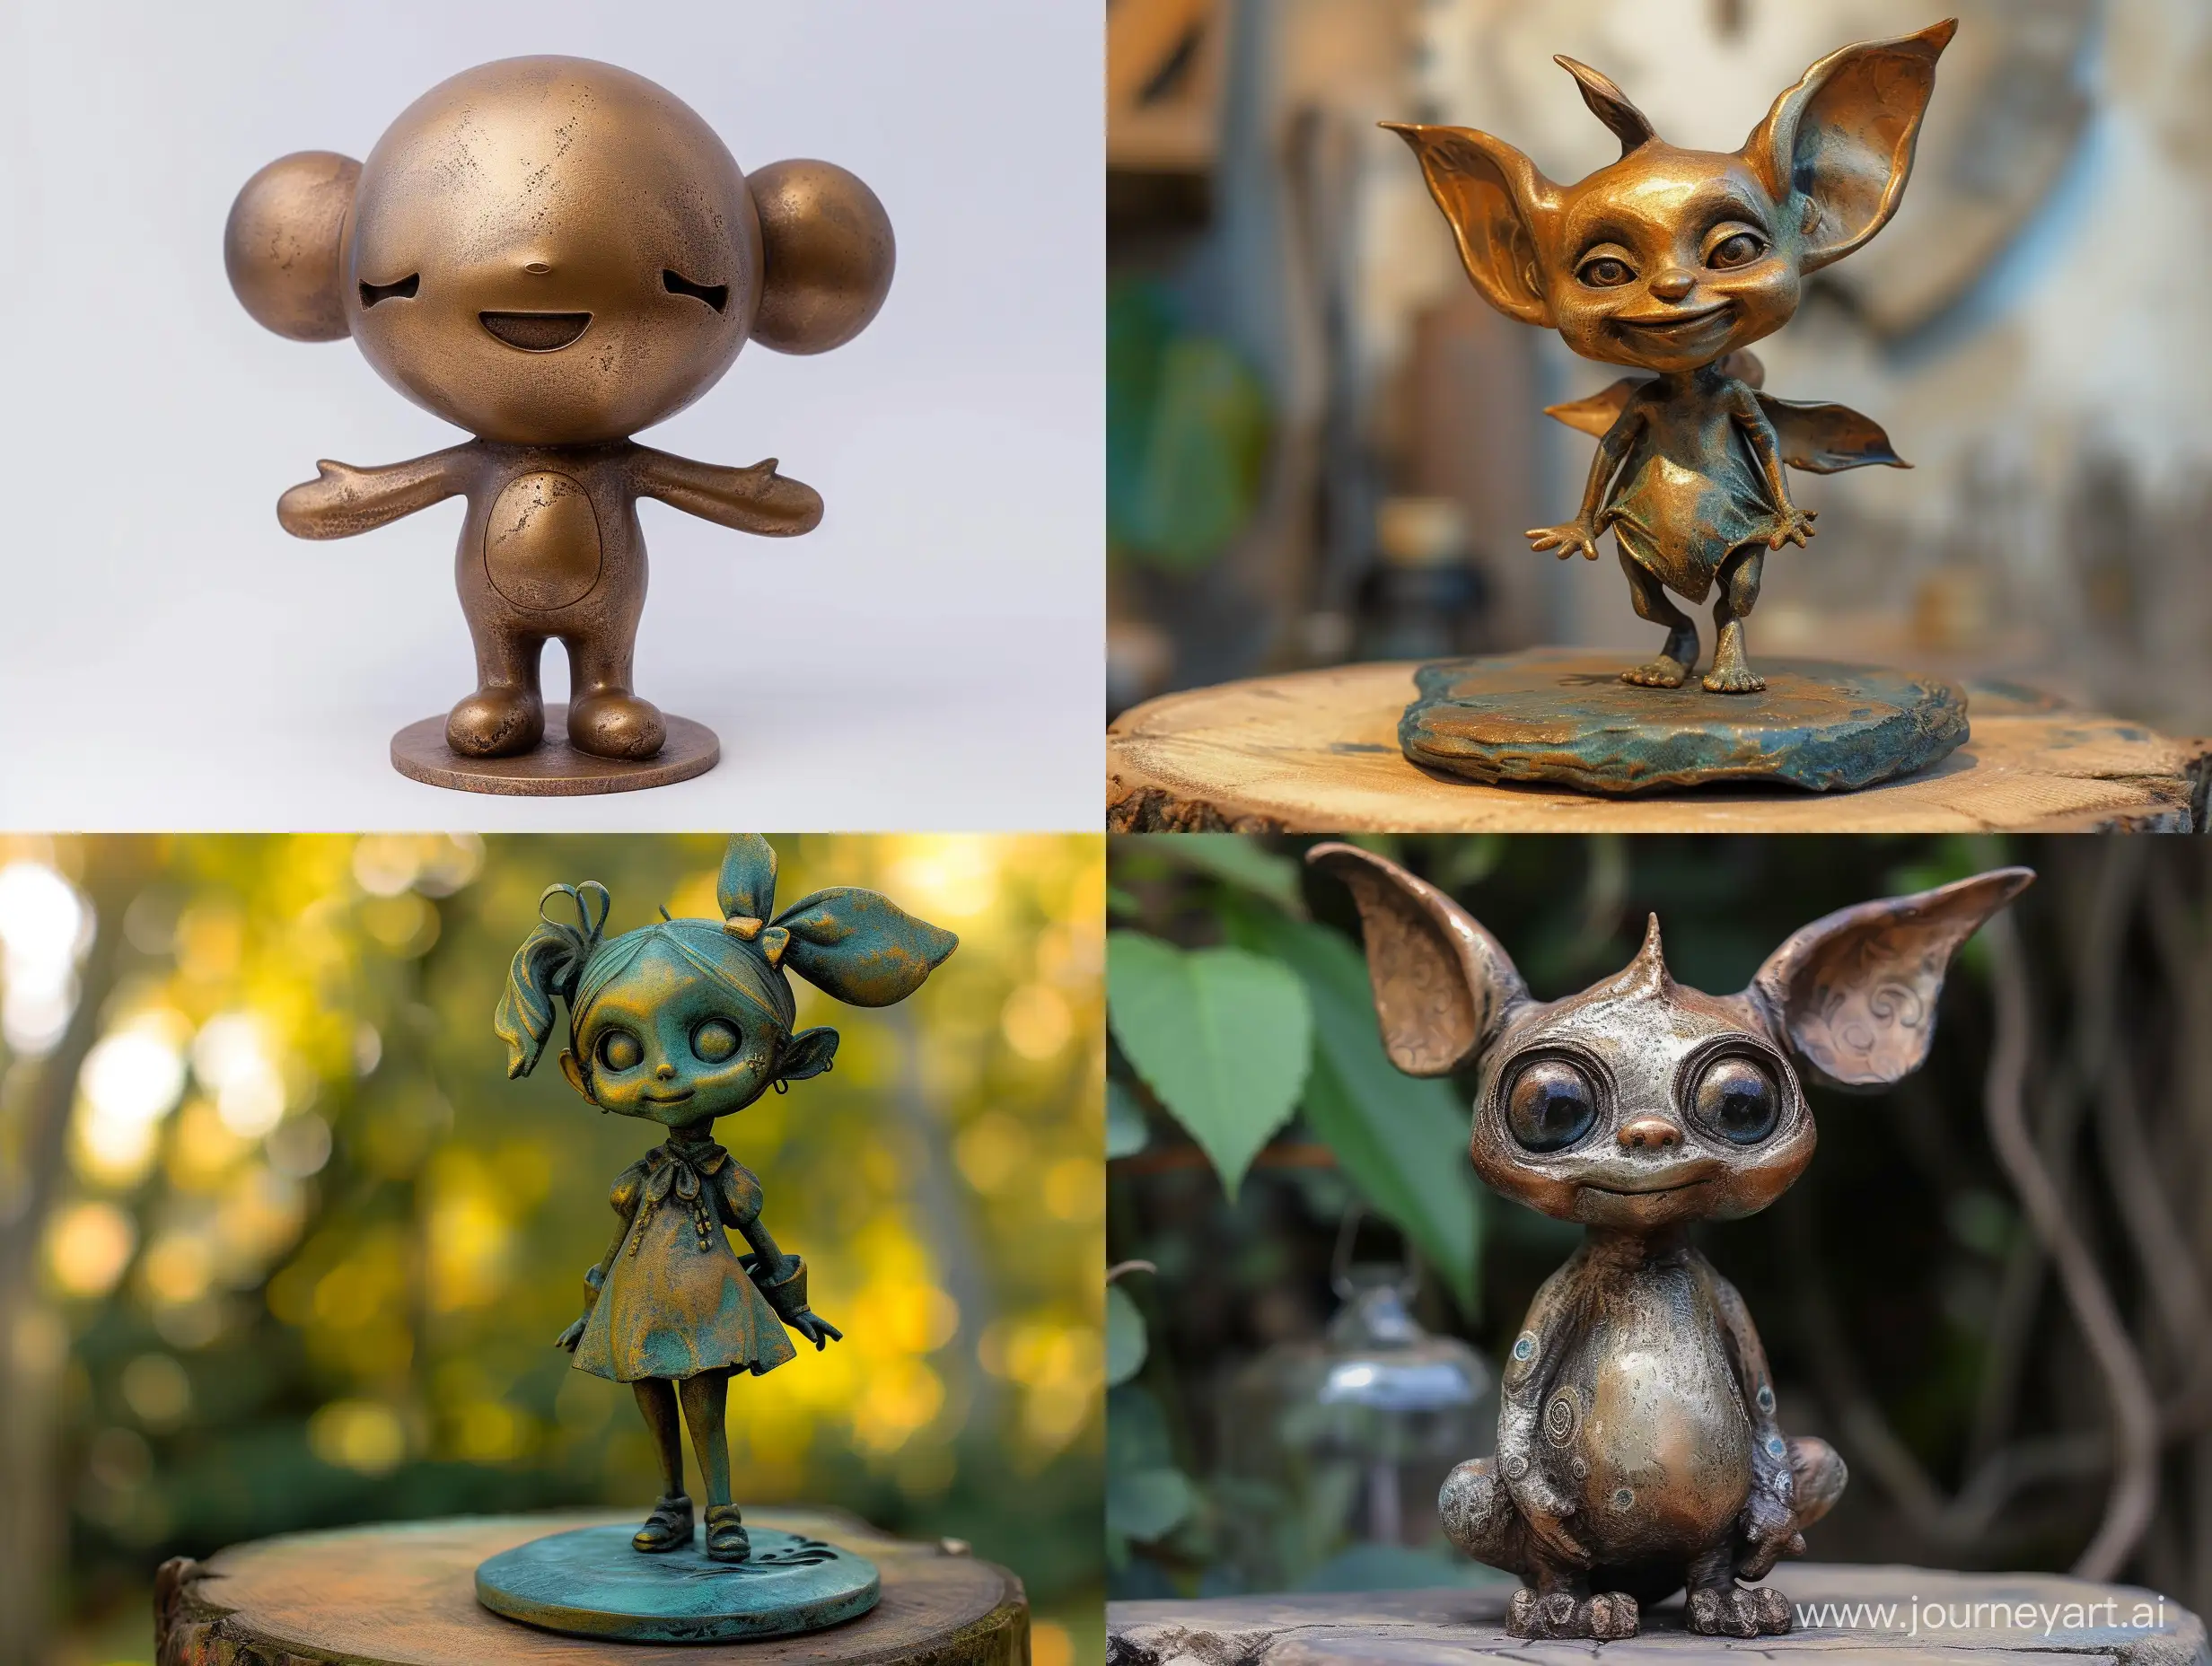 Magical-Bronze-Statue-of-a-Cute-Imaginary-Character